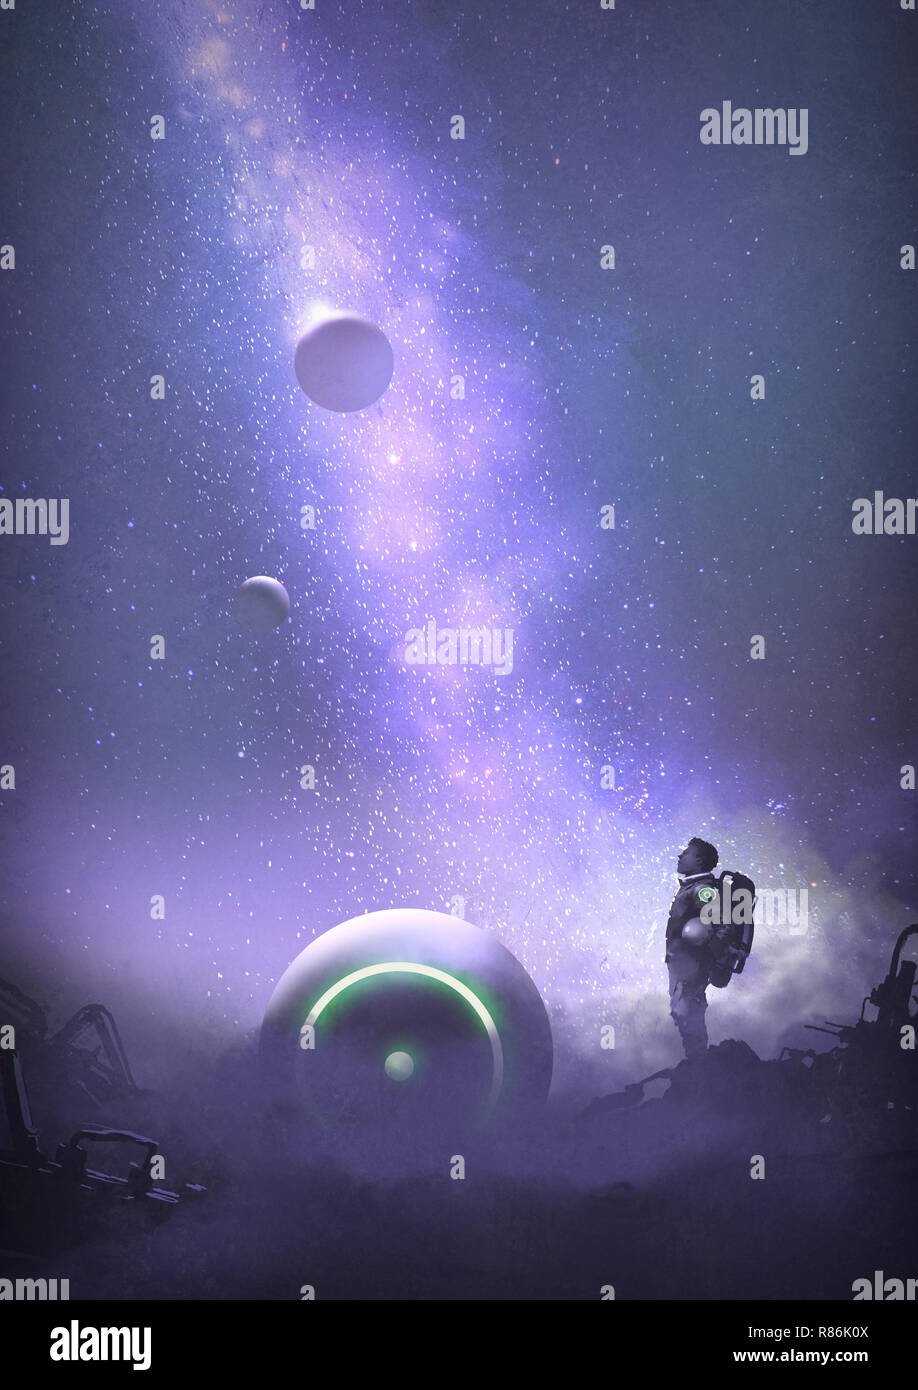 astronaut on abandoned planet looking up at the starry sky, digital art style, illustration painting Stock Photo